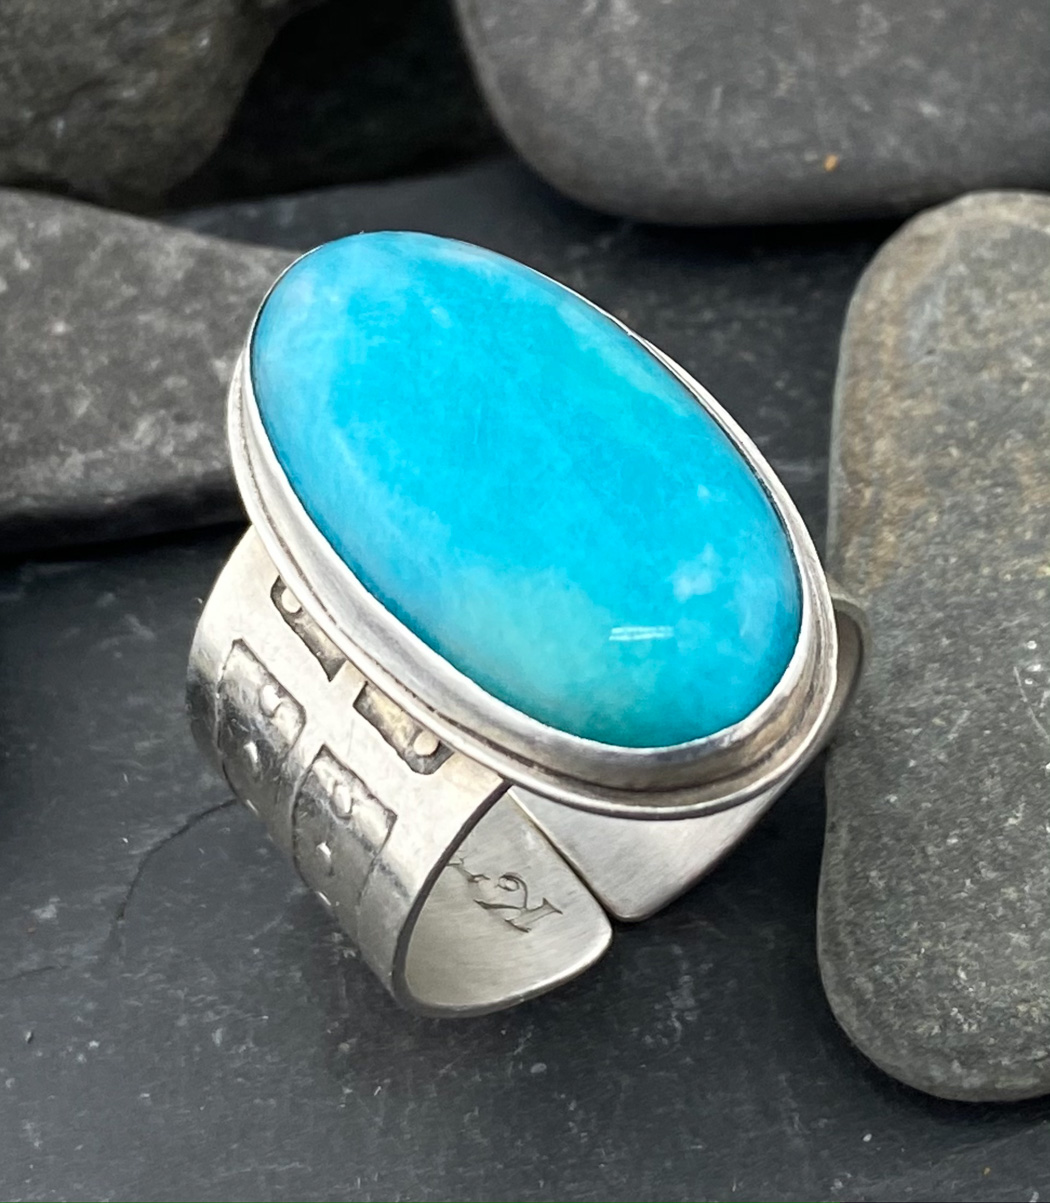 Closeup of a metal ring with a blue stone on it